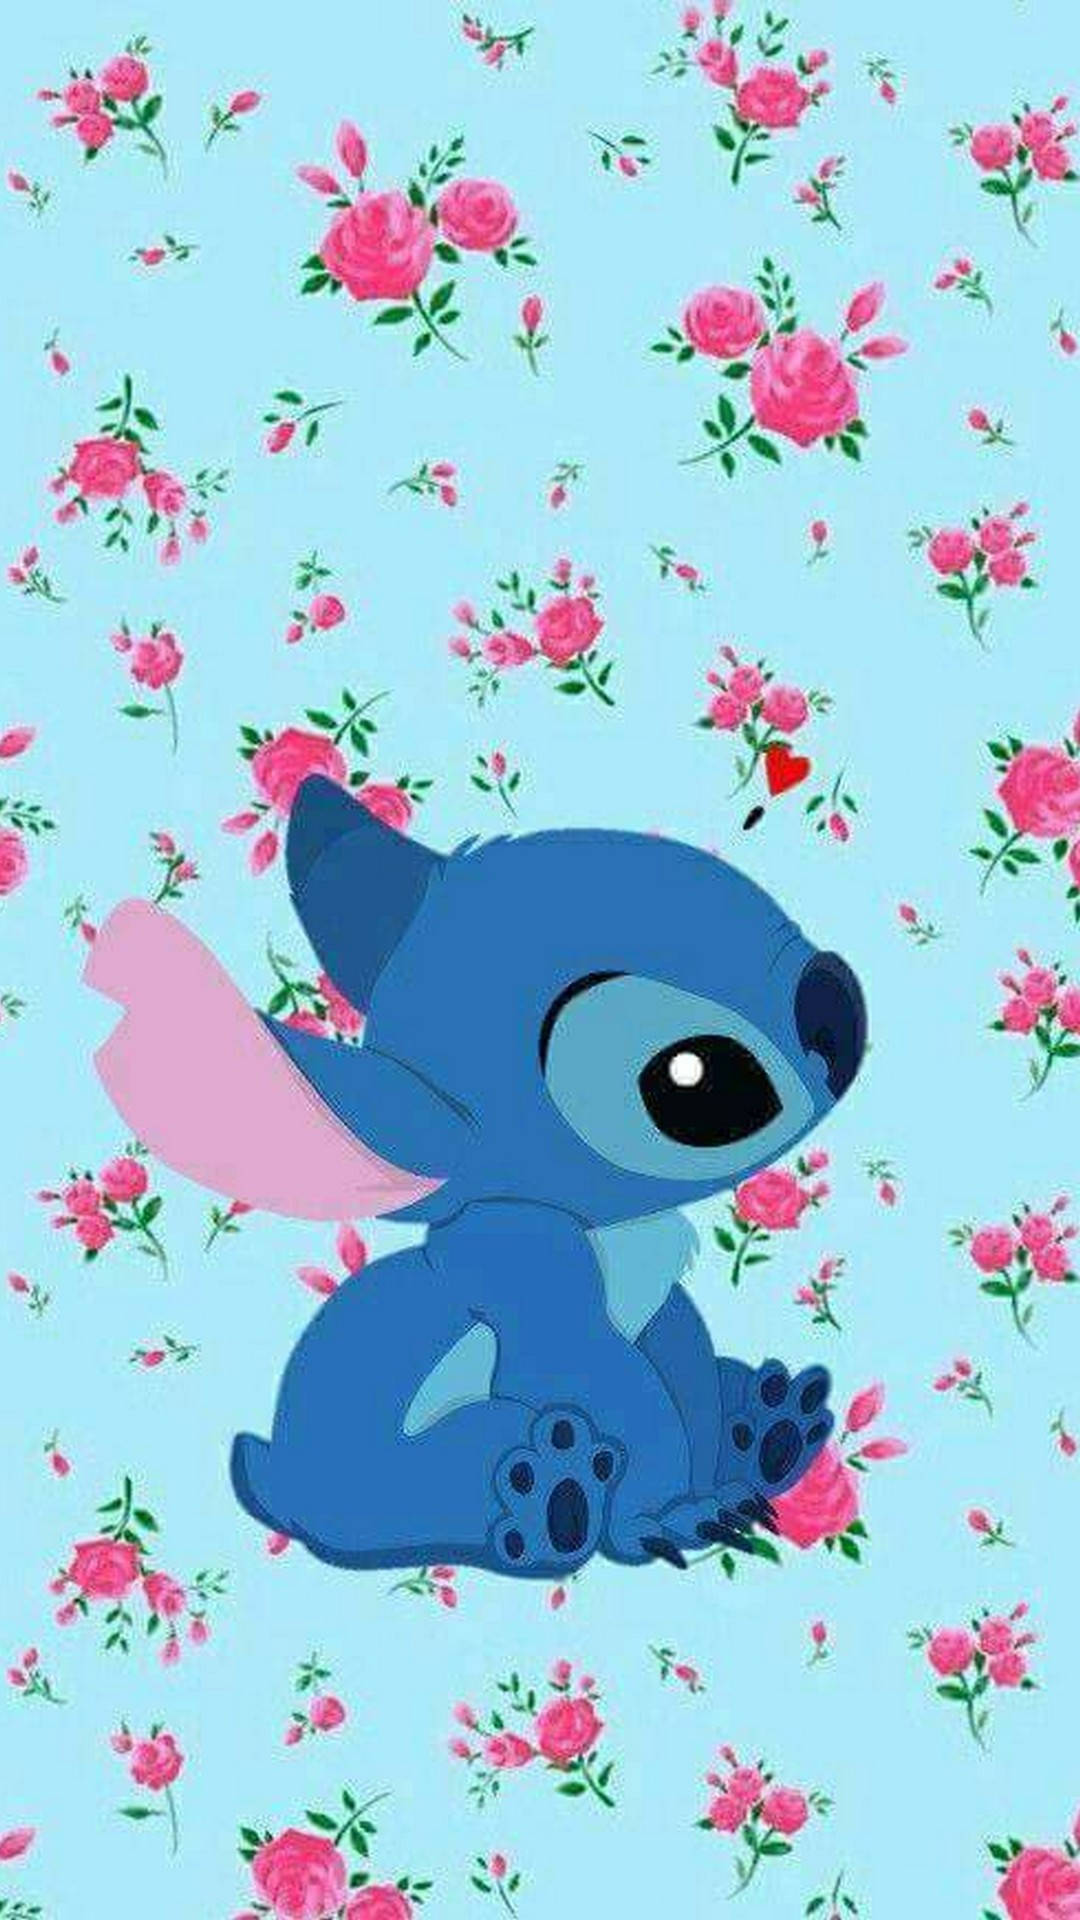 Cute Stitch And Pink Roses Wallpaper